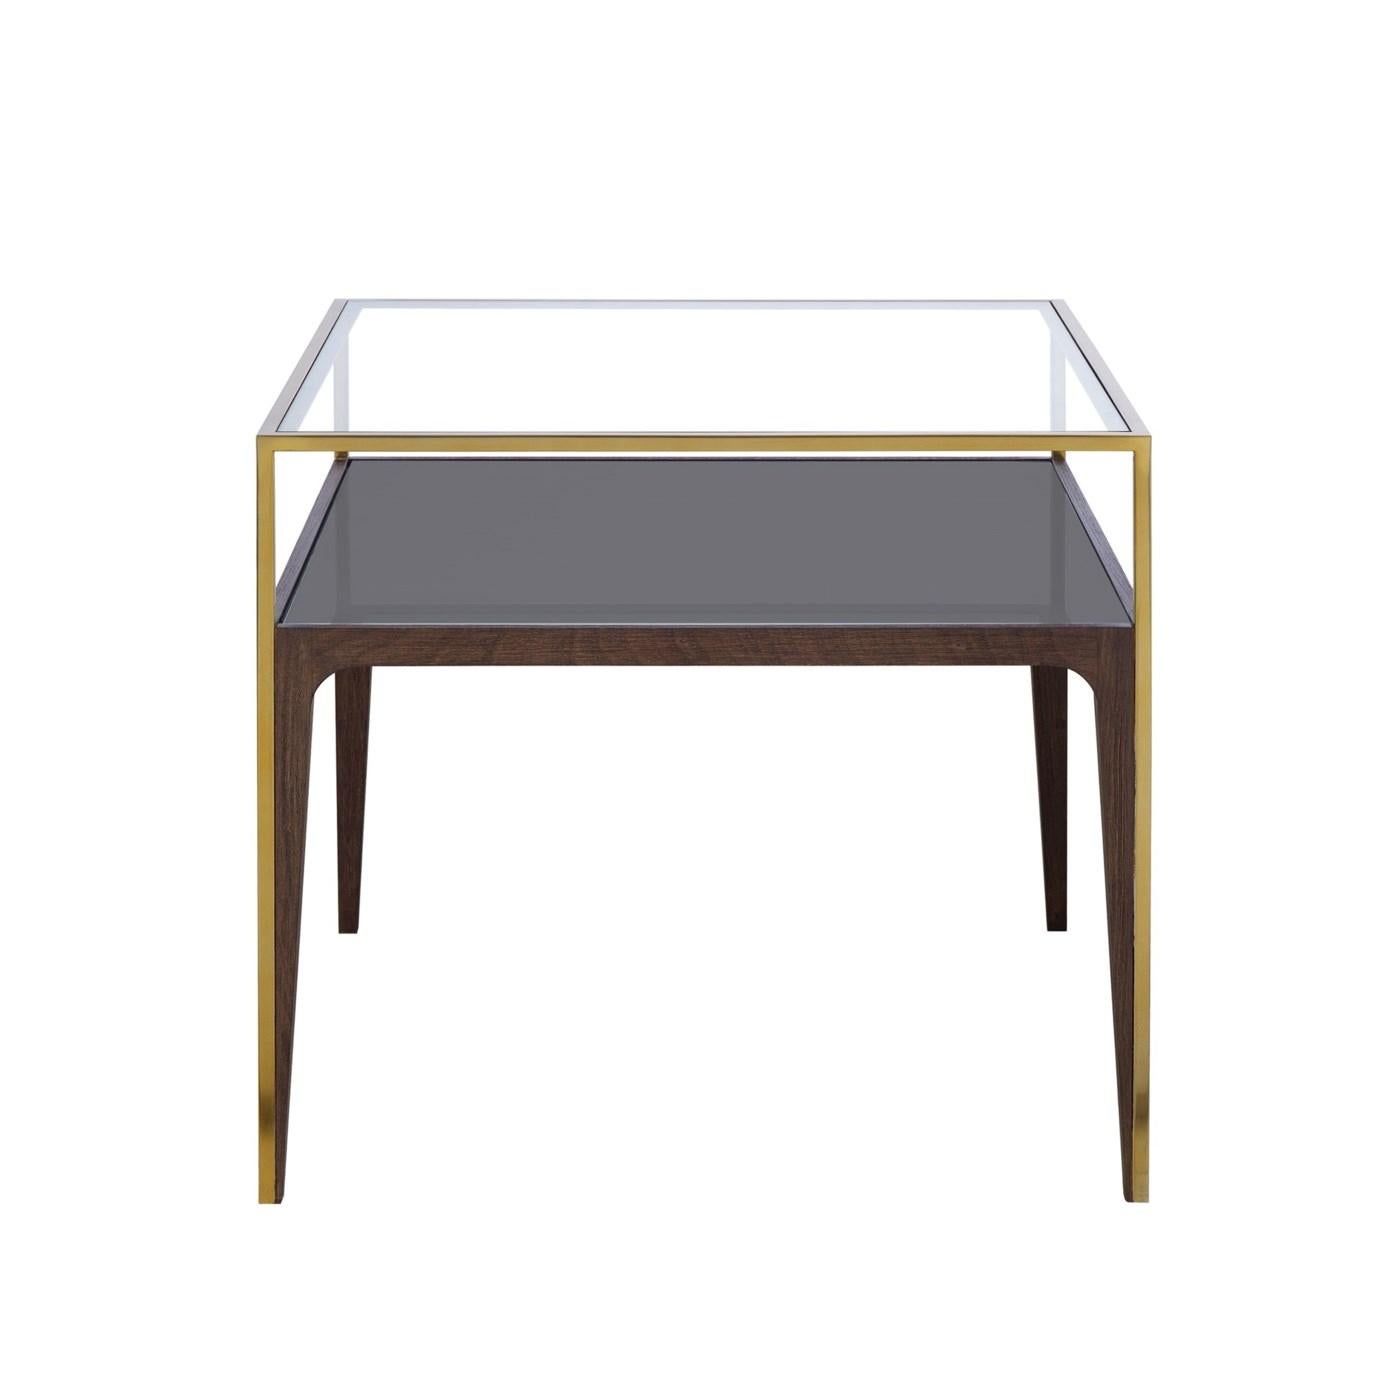 Side table accent with structure in solid beechwood
and walnut tinted. With smoked tempered glass shelve top
and with clear glass top. With stainless steel rim in vintage
brass finish on feet and around the clear glass top.